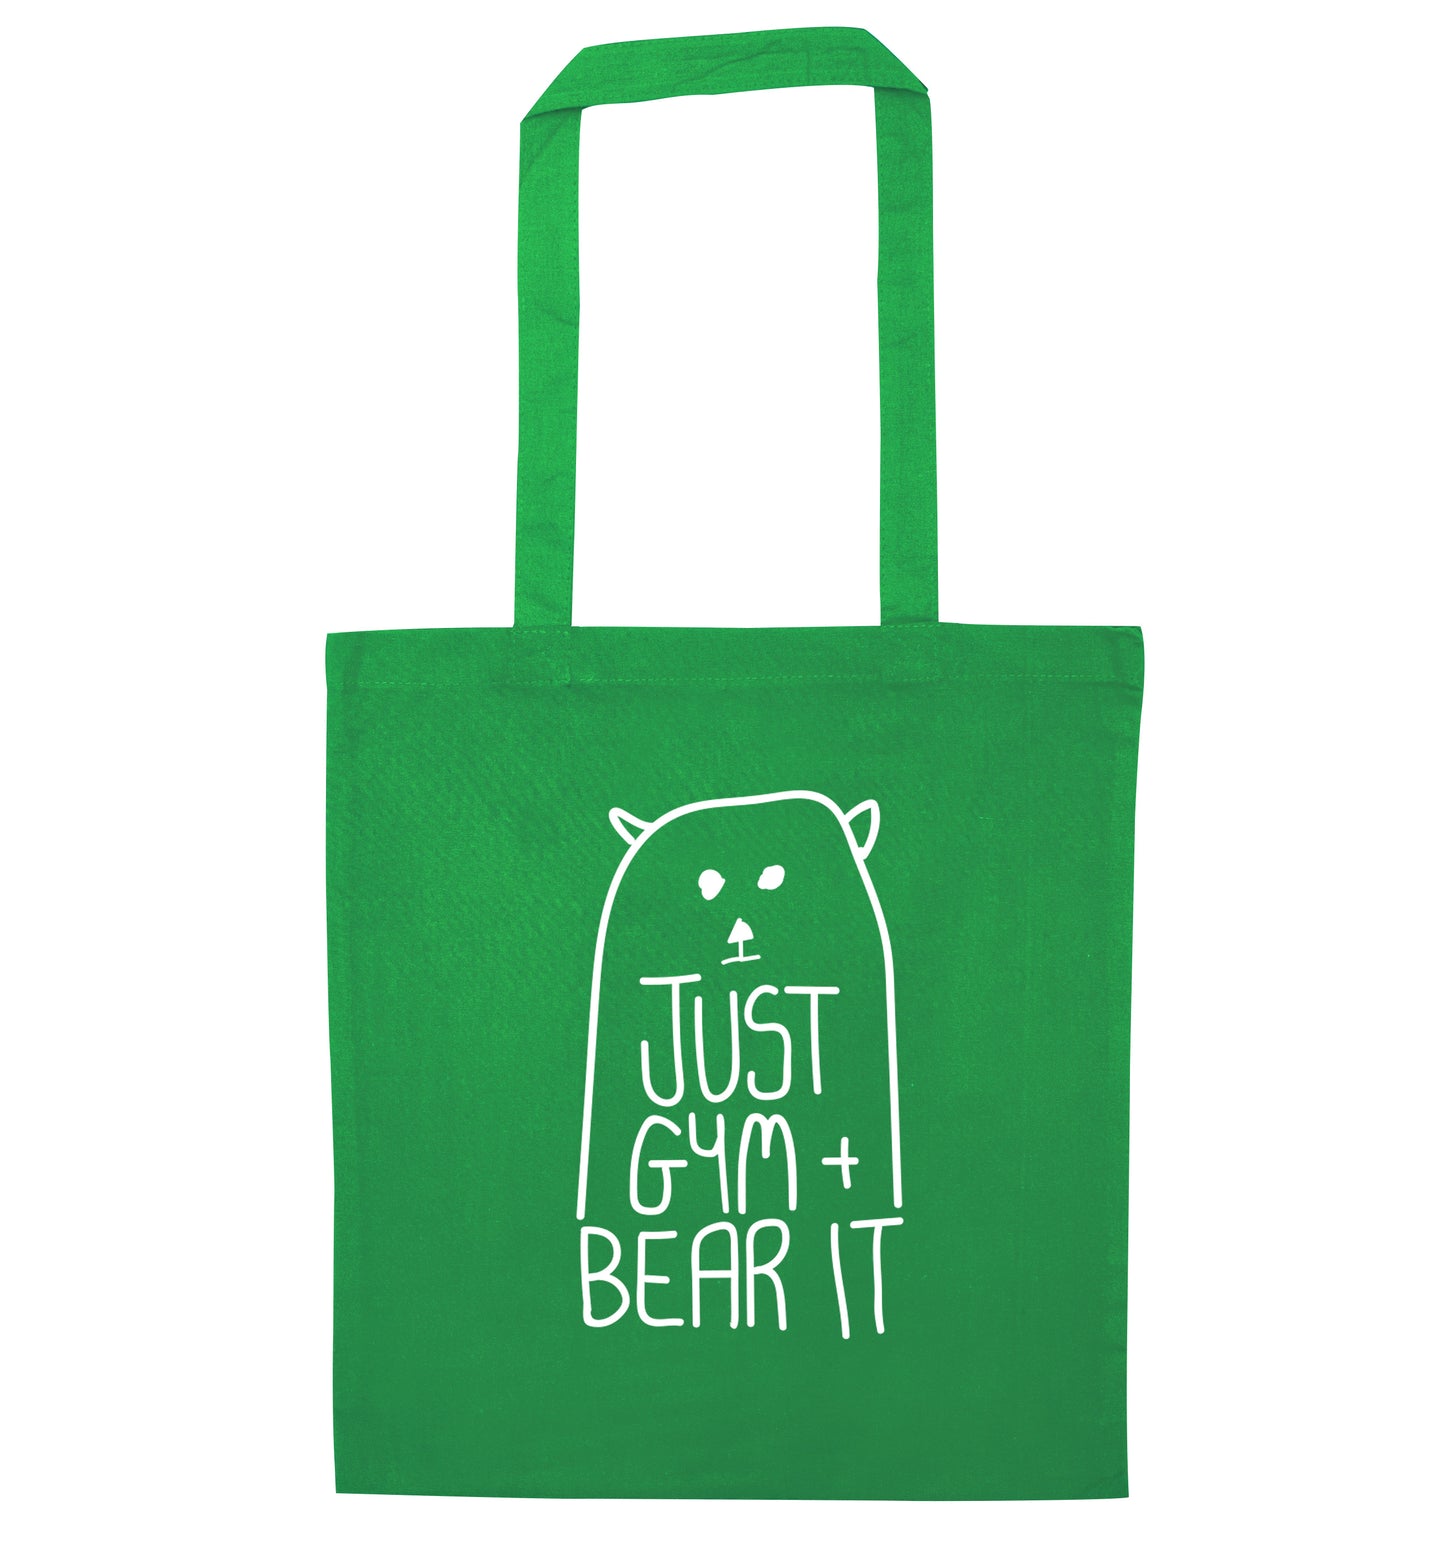 Just gym and bear it green tote bag